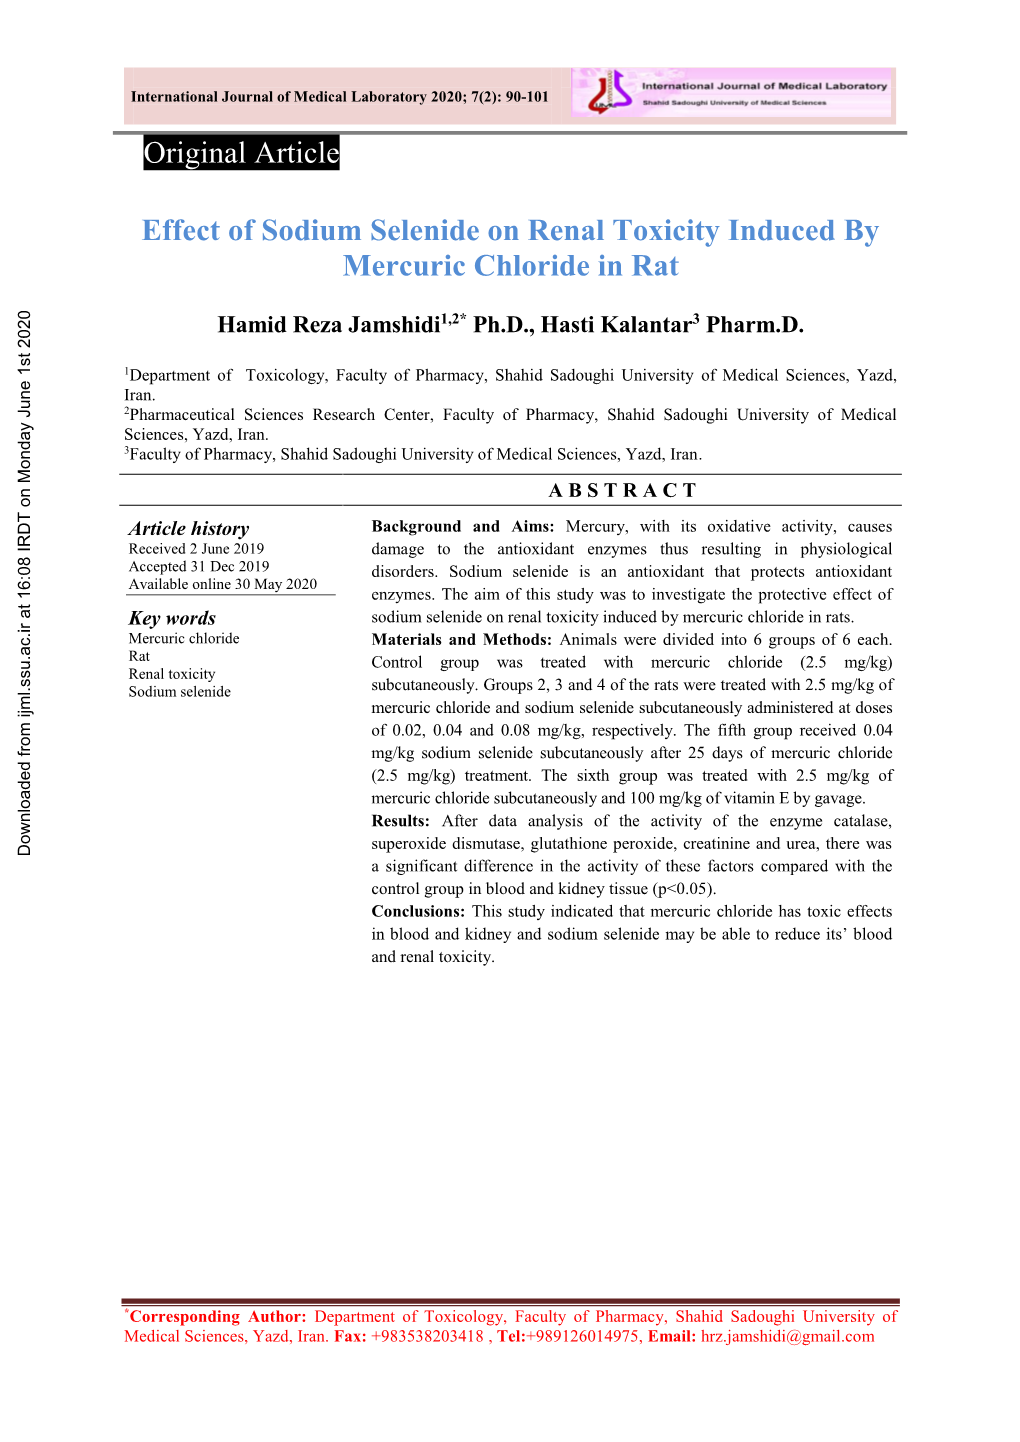 Effect of Sodium Selenide on Renal Toxicity Induced by Mercuric Chloride in Rat